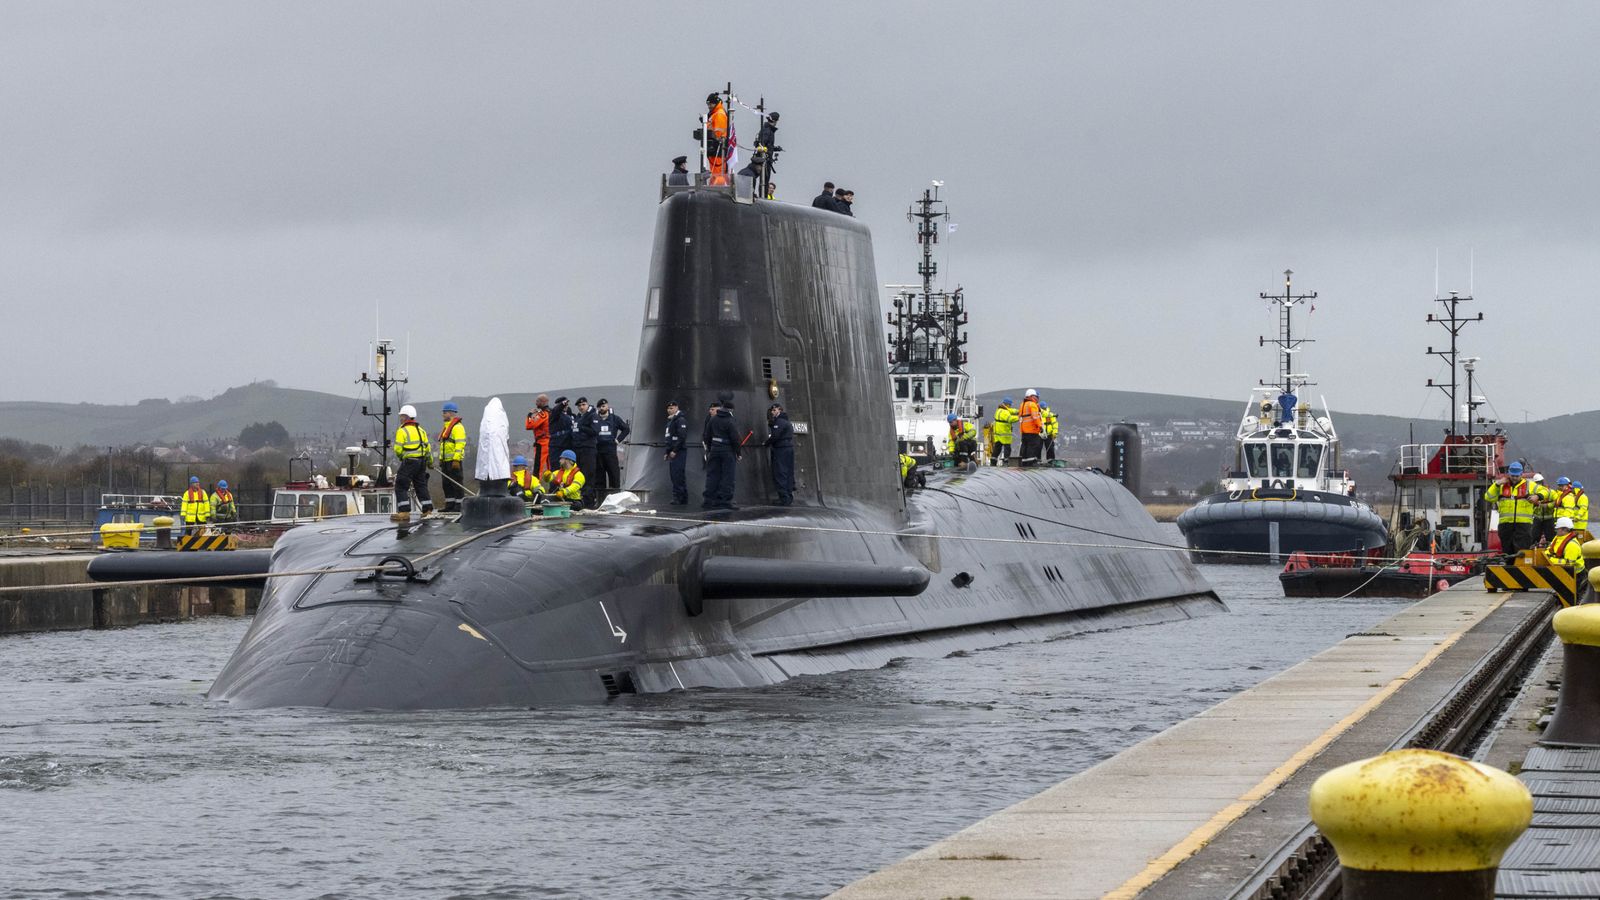 Sunak to announce 'next generation' of UK nuclear as he visits submarine shipyard in Barrow